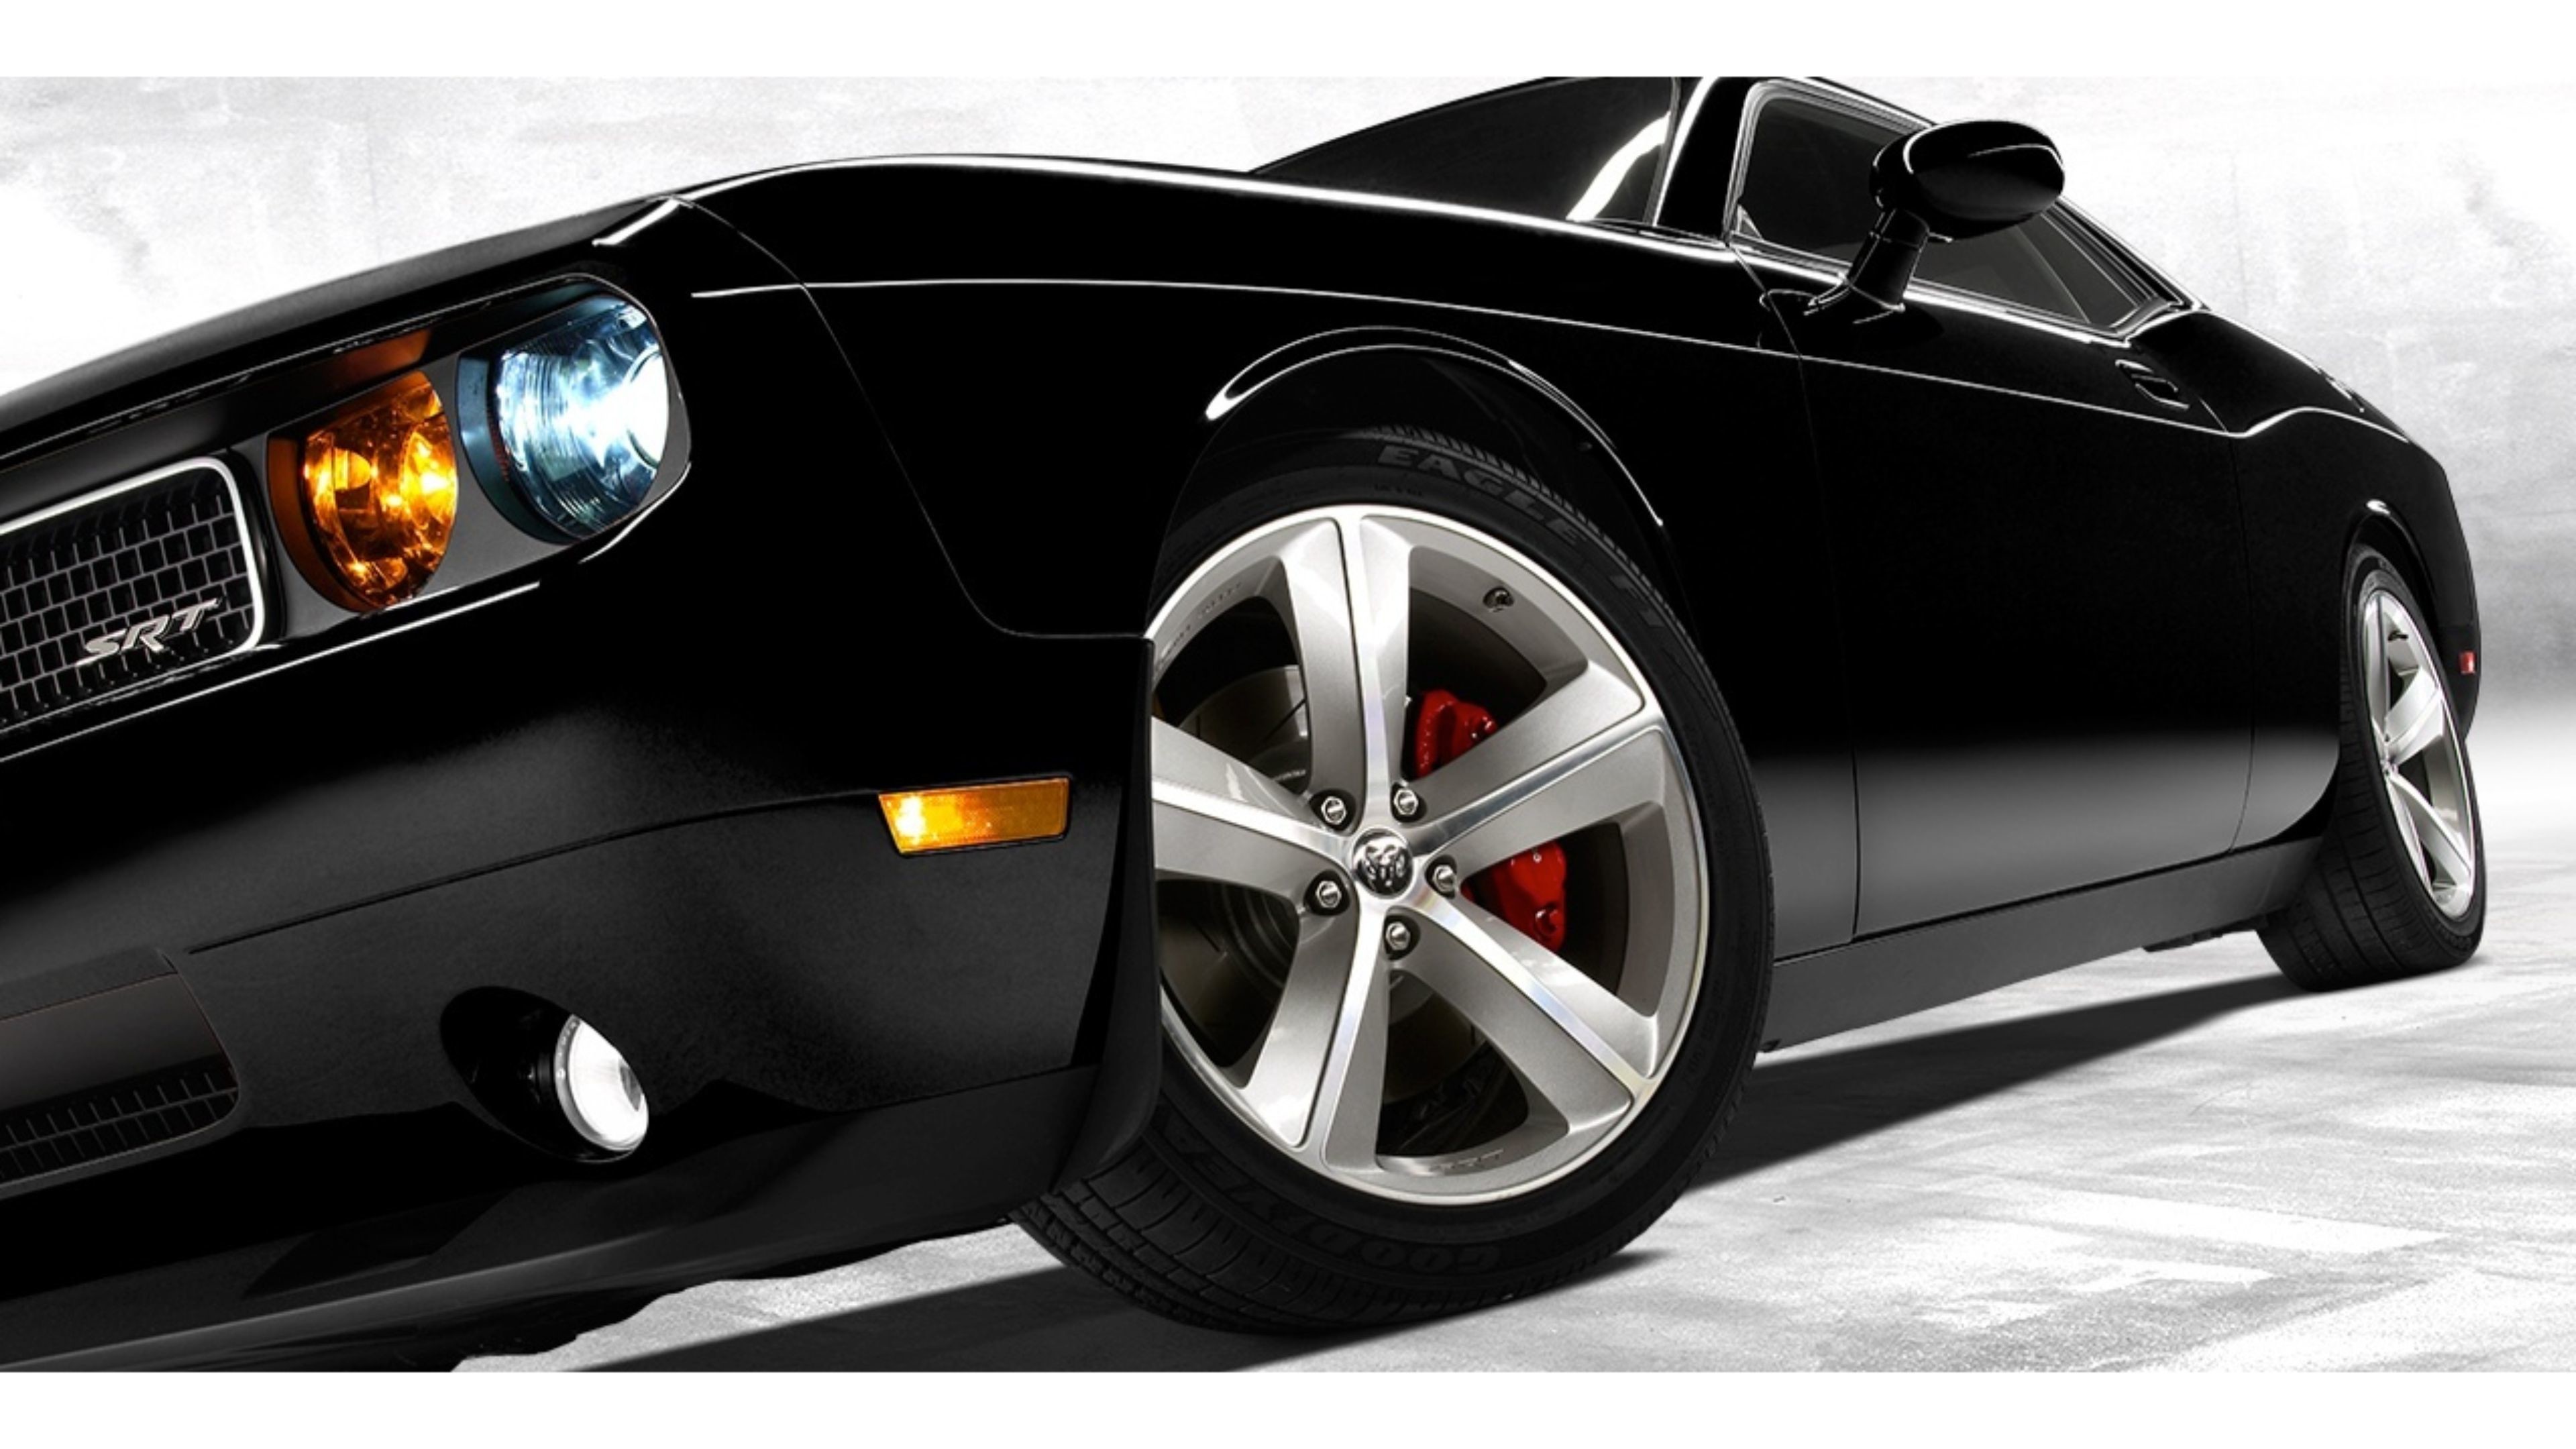 Fast and Furious Cars Wallpaper (69+ pictures)3840 x 2160